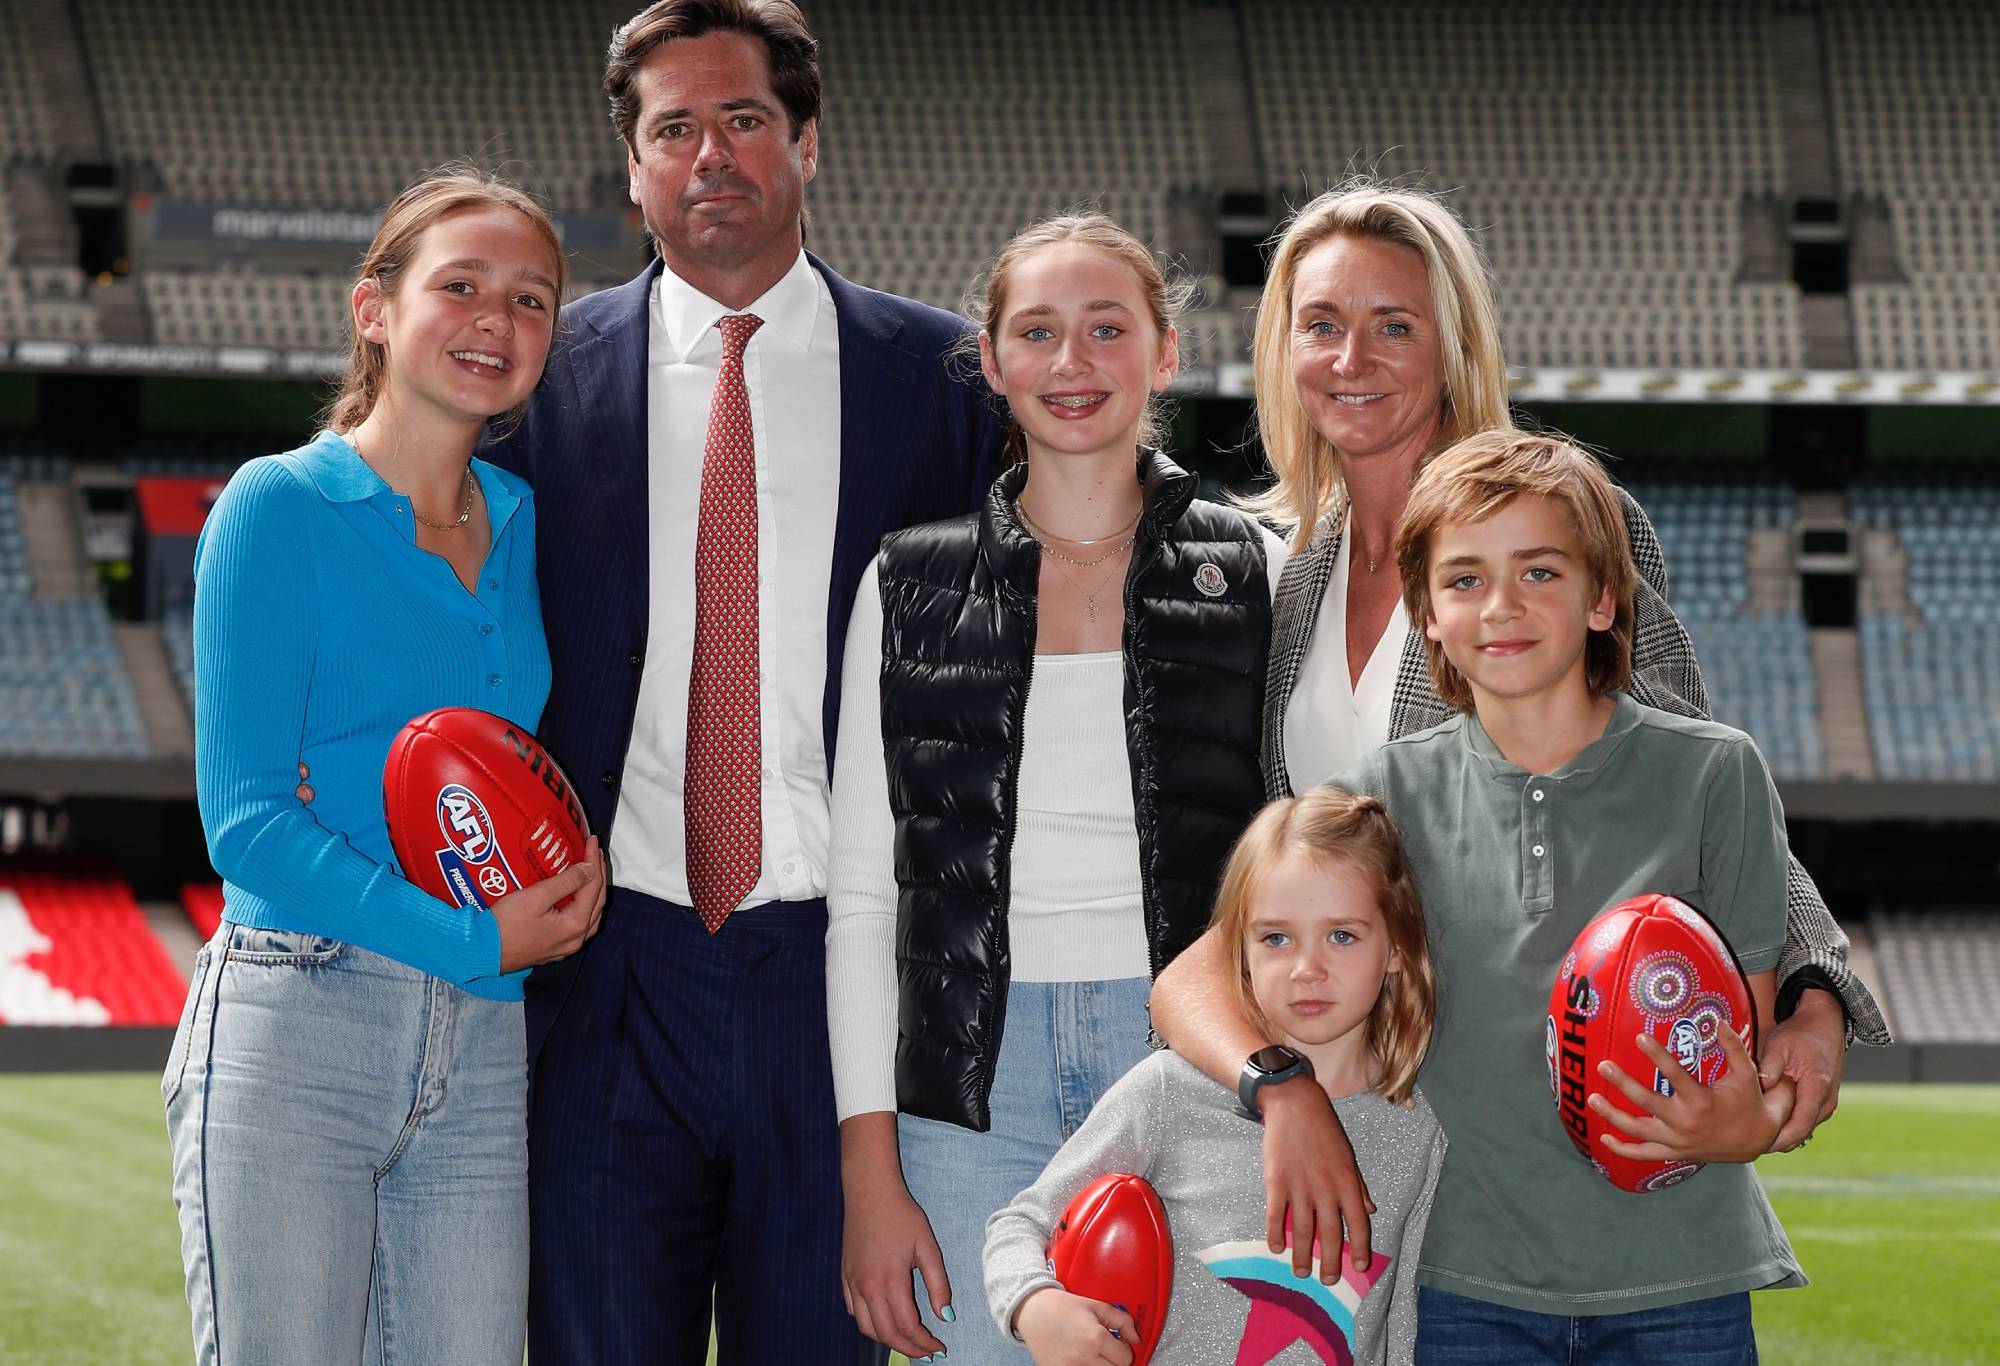 Gillon McLachlan, Chief Executive Officer of the AFL poses for a photograph with children Sydney, Edie, Cleo, Luna and wife Laura speaks to media after announcing he will step down from his role at the end of the season during an AFL Press Conference at AFL House on April 22, 2022 in Melbourne, Australia. (Photo by Michael Willson/AFL Photos via Getty Images)